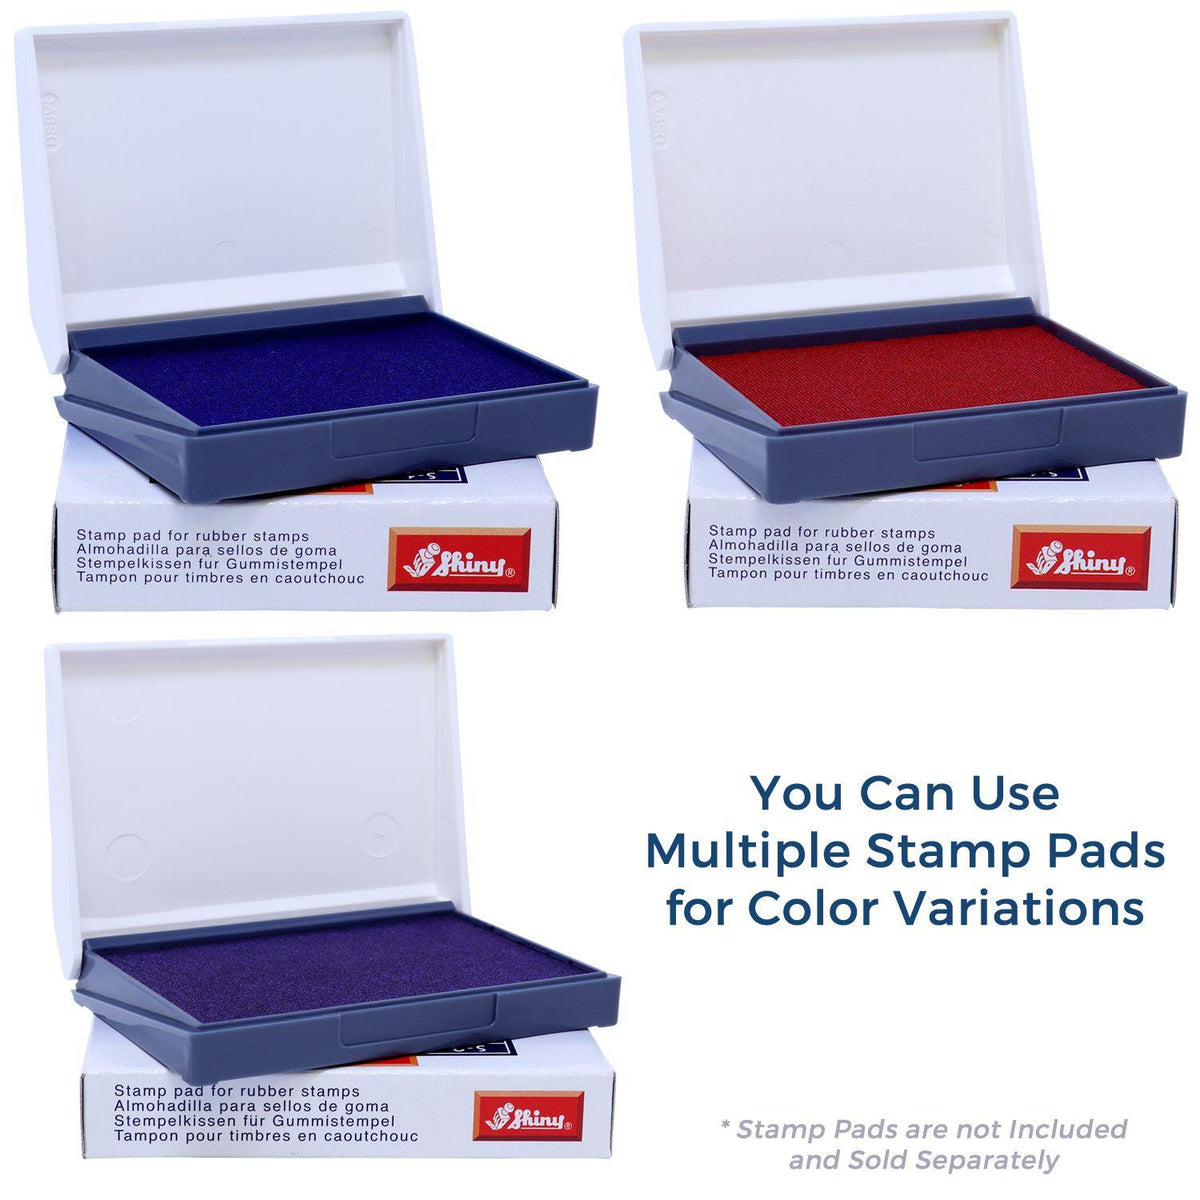 Stamp Pads for Large Lower Case First Class Rubber Stamp Available